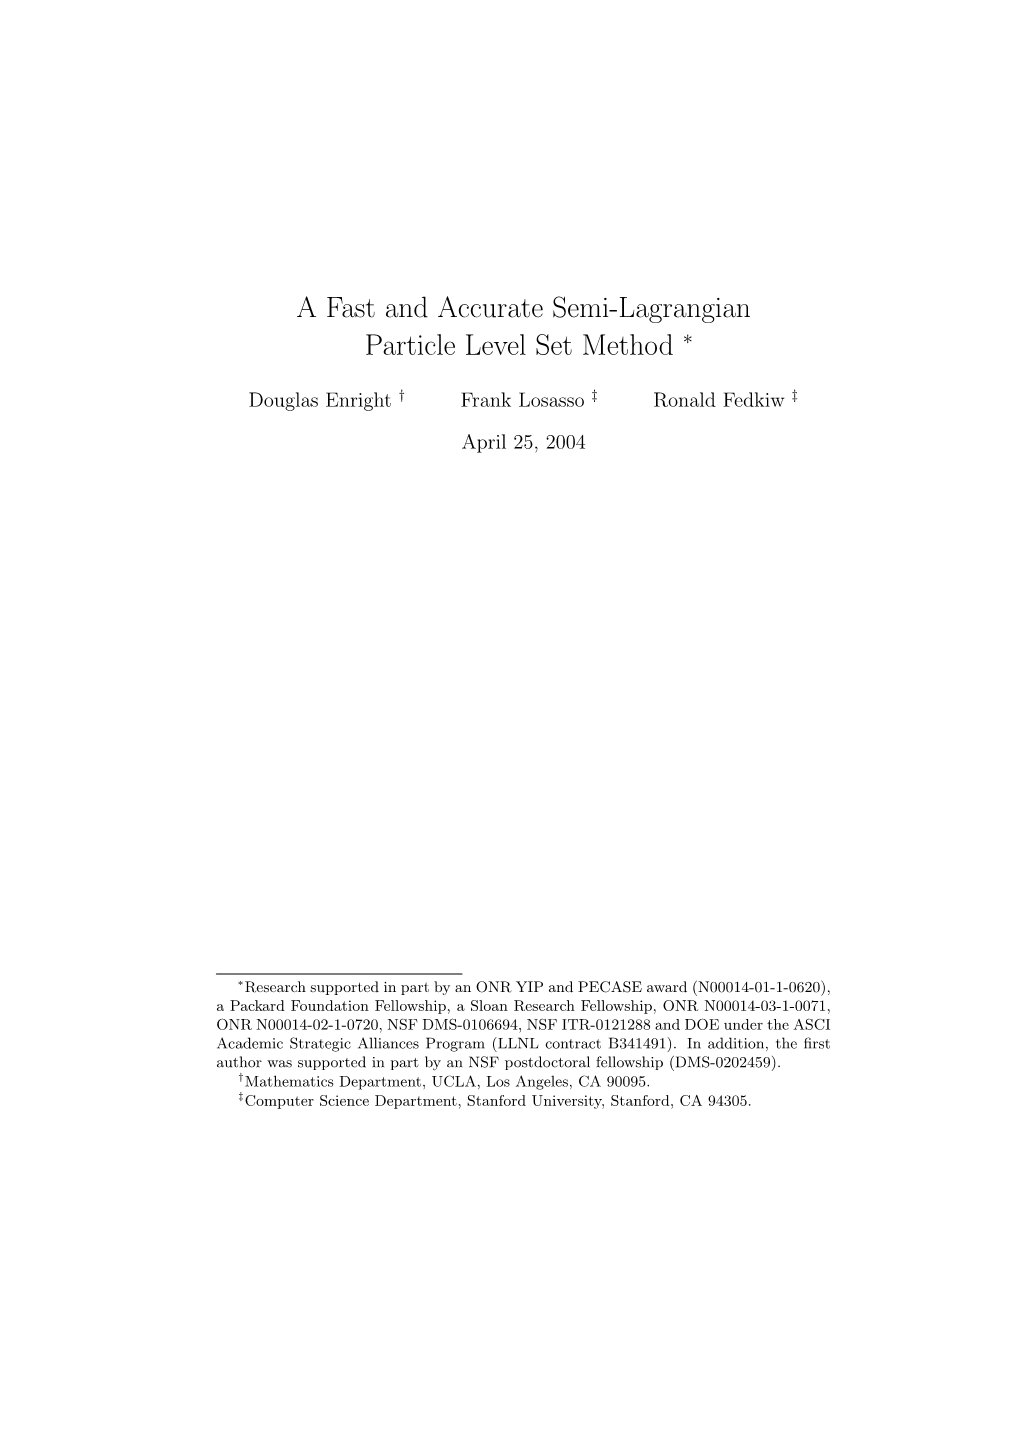 A Fast and Accurate Semi-Lagrangian Particle Level Set Method ∗